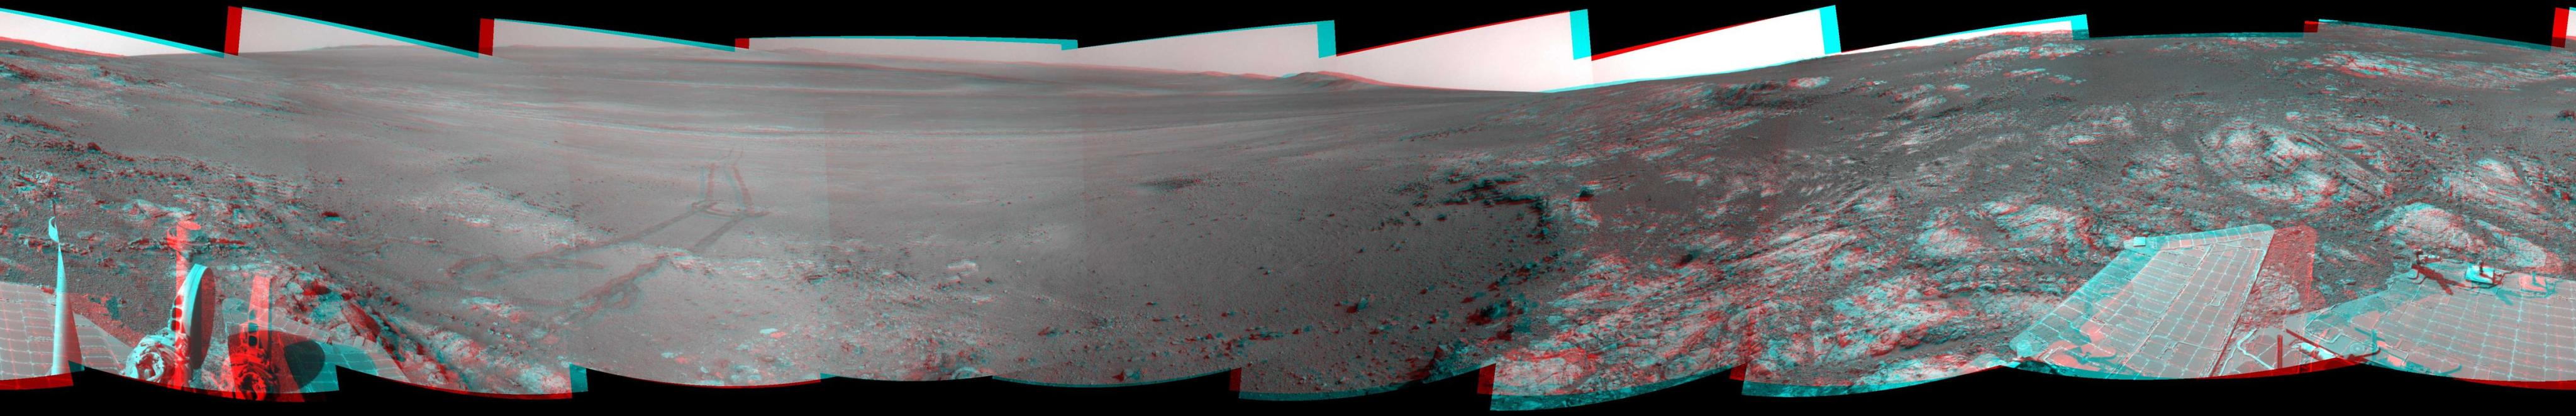 This full-circle, stereo panorama shows the terrain around the NASA Mars Exploration Rover Opportunity during the 3,071st Martian day, or sol, of the rover's work on Mars (Sept. 13, 2012).